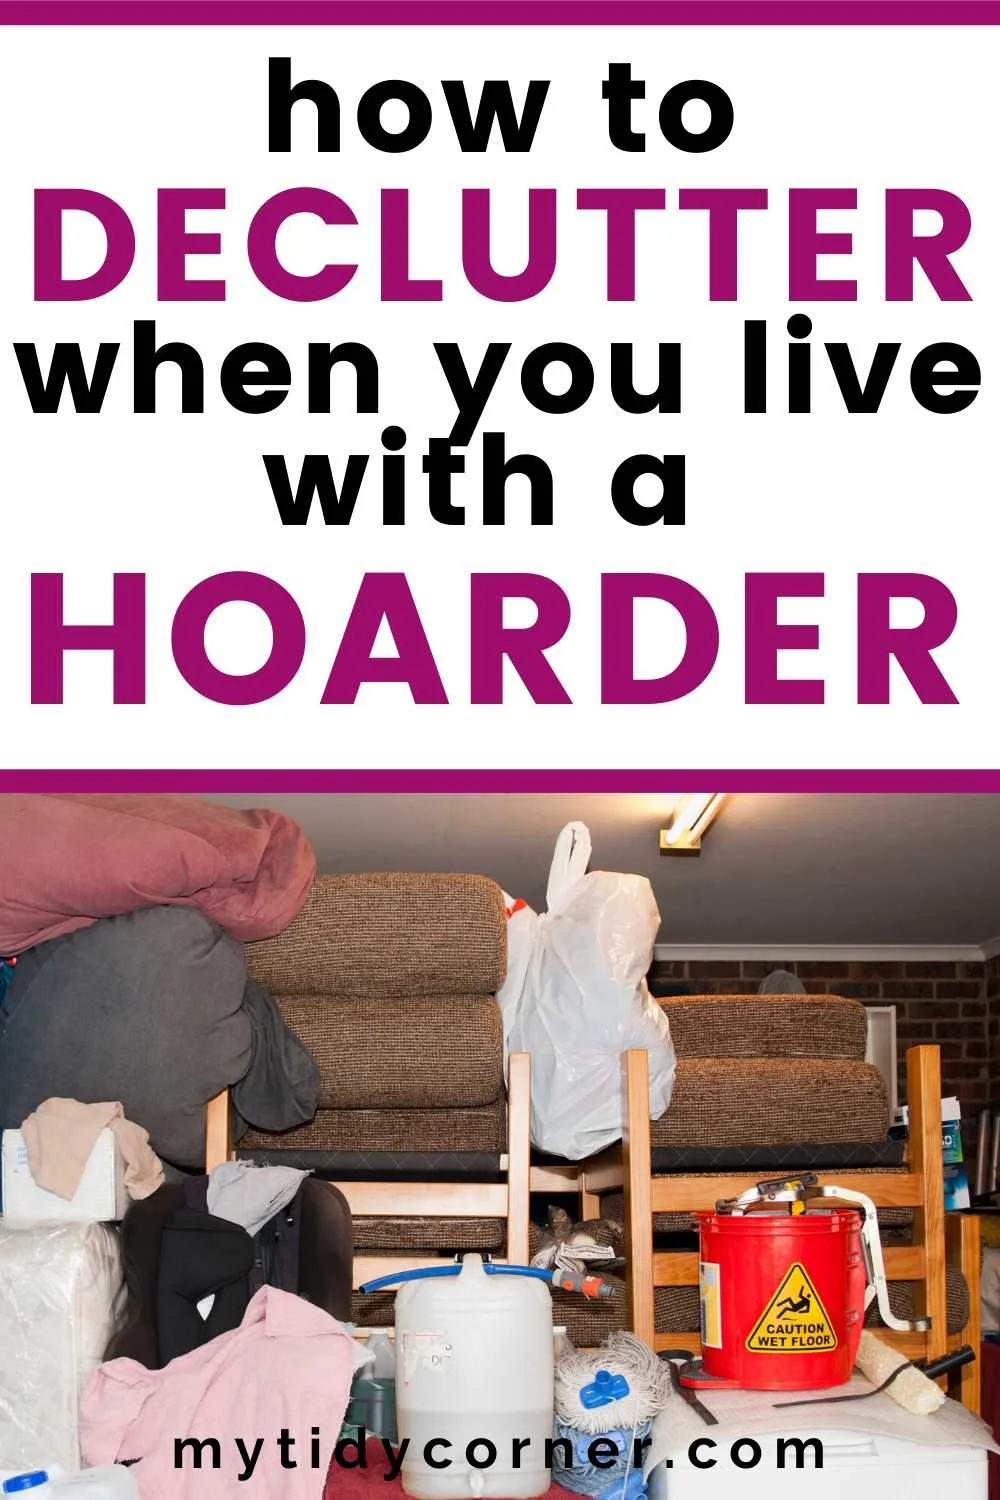 Decluttering when you live with a hoarder